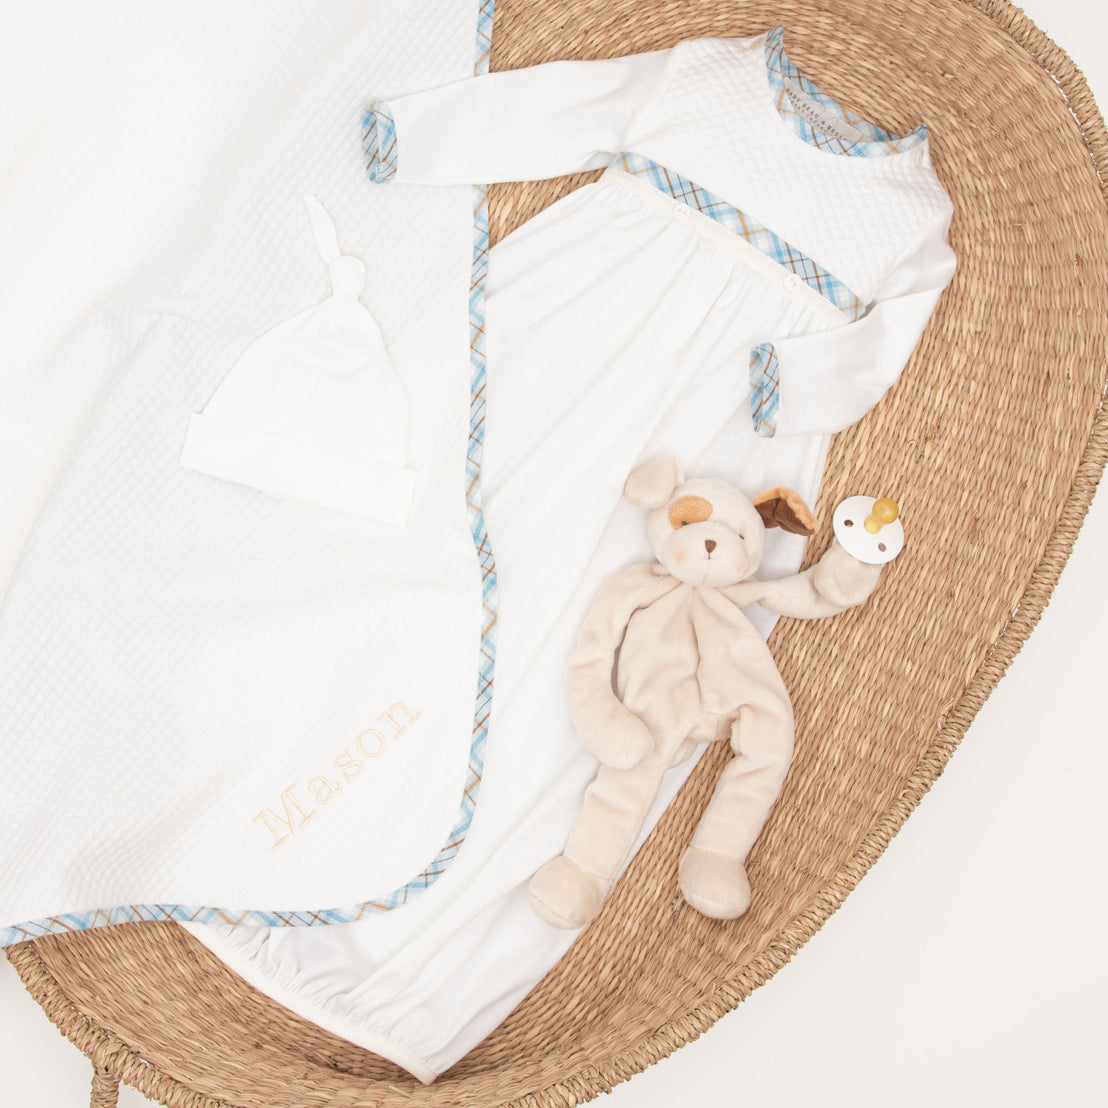 A baby's Mason newborn gift set comprising a white onesie, hat, and bib, personalized with the name "Mason", displayed with a plush puppy toy on an upscale woven round mat.